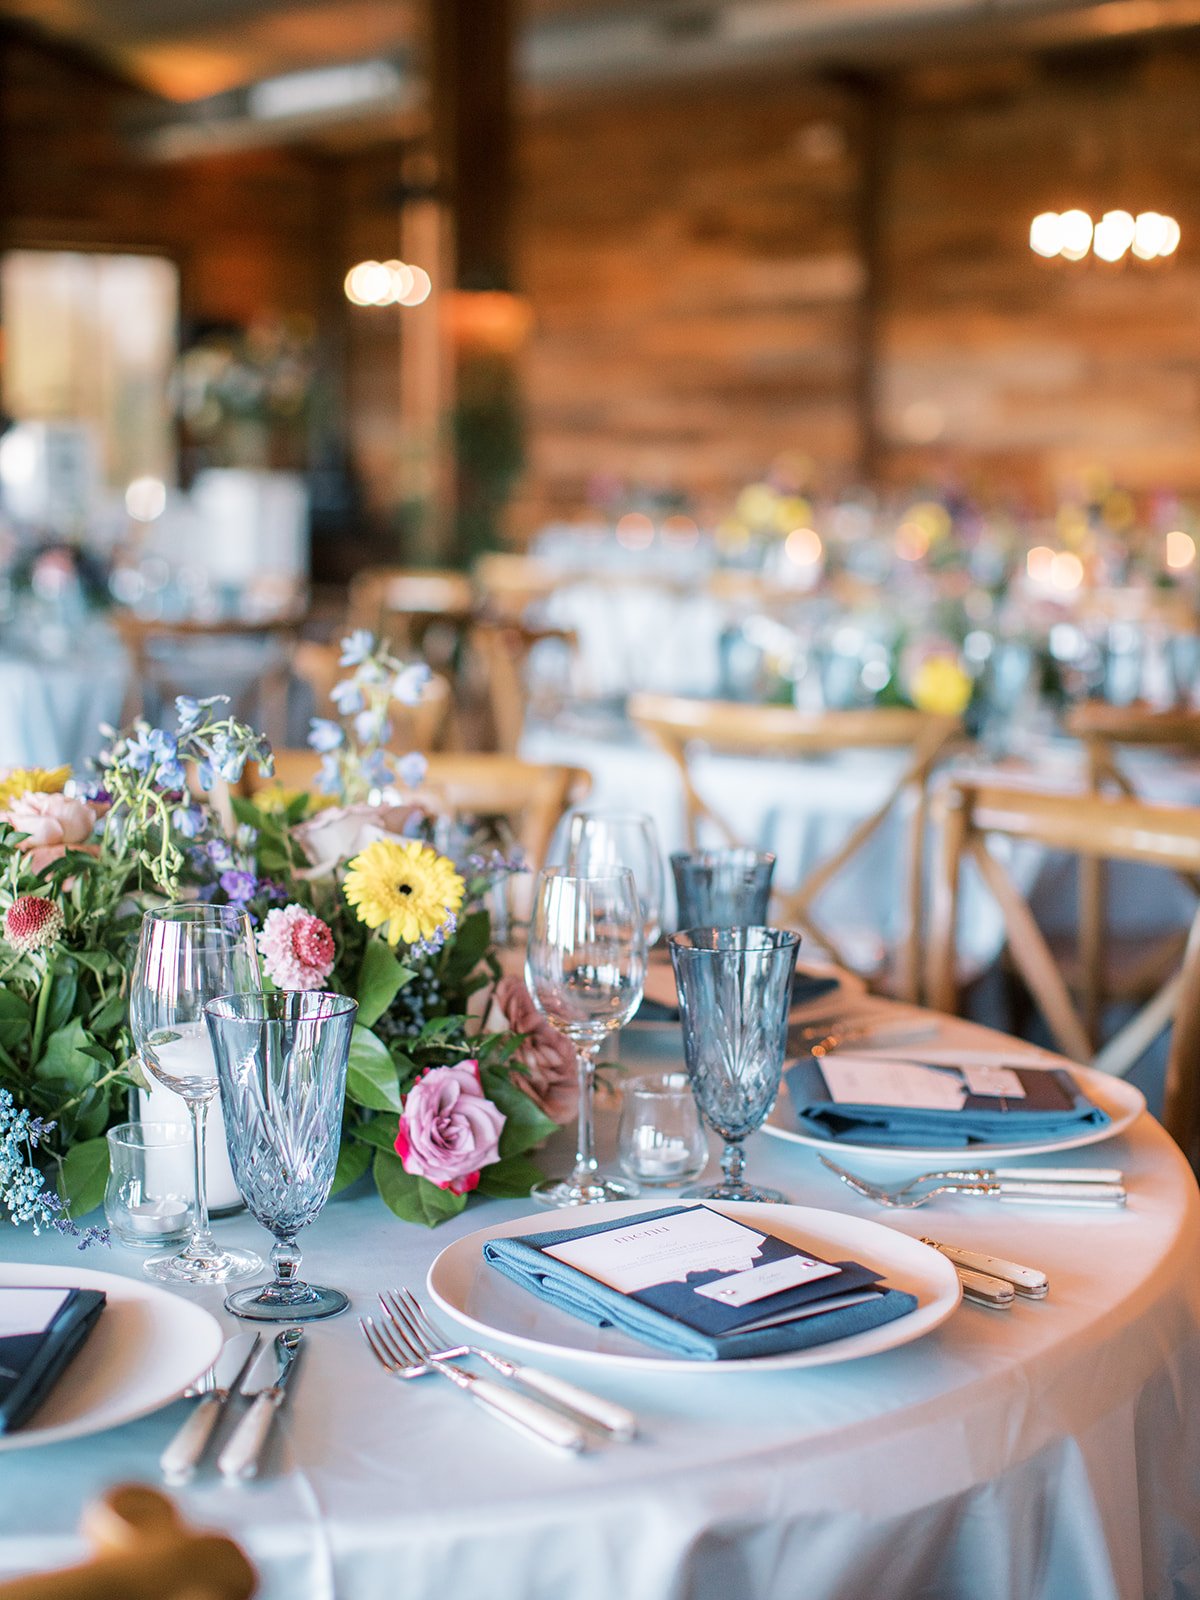 Wedding tablescape with light blue linen, dark blue menu, white silverware and colorful flowers